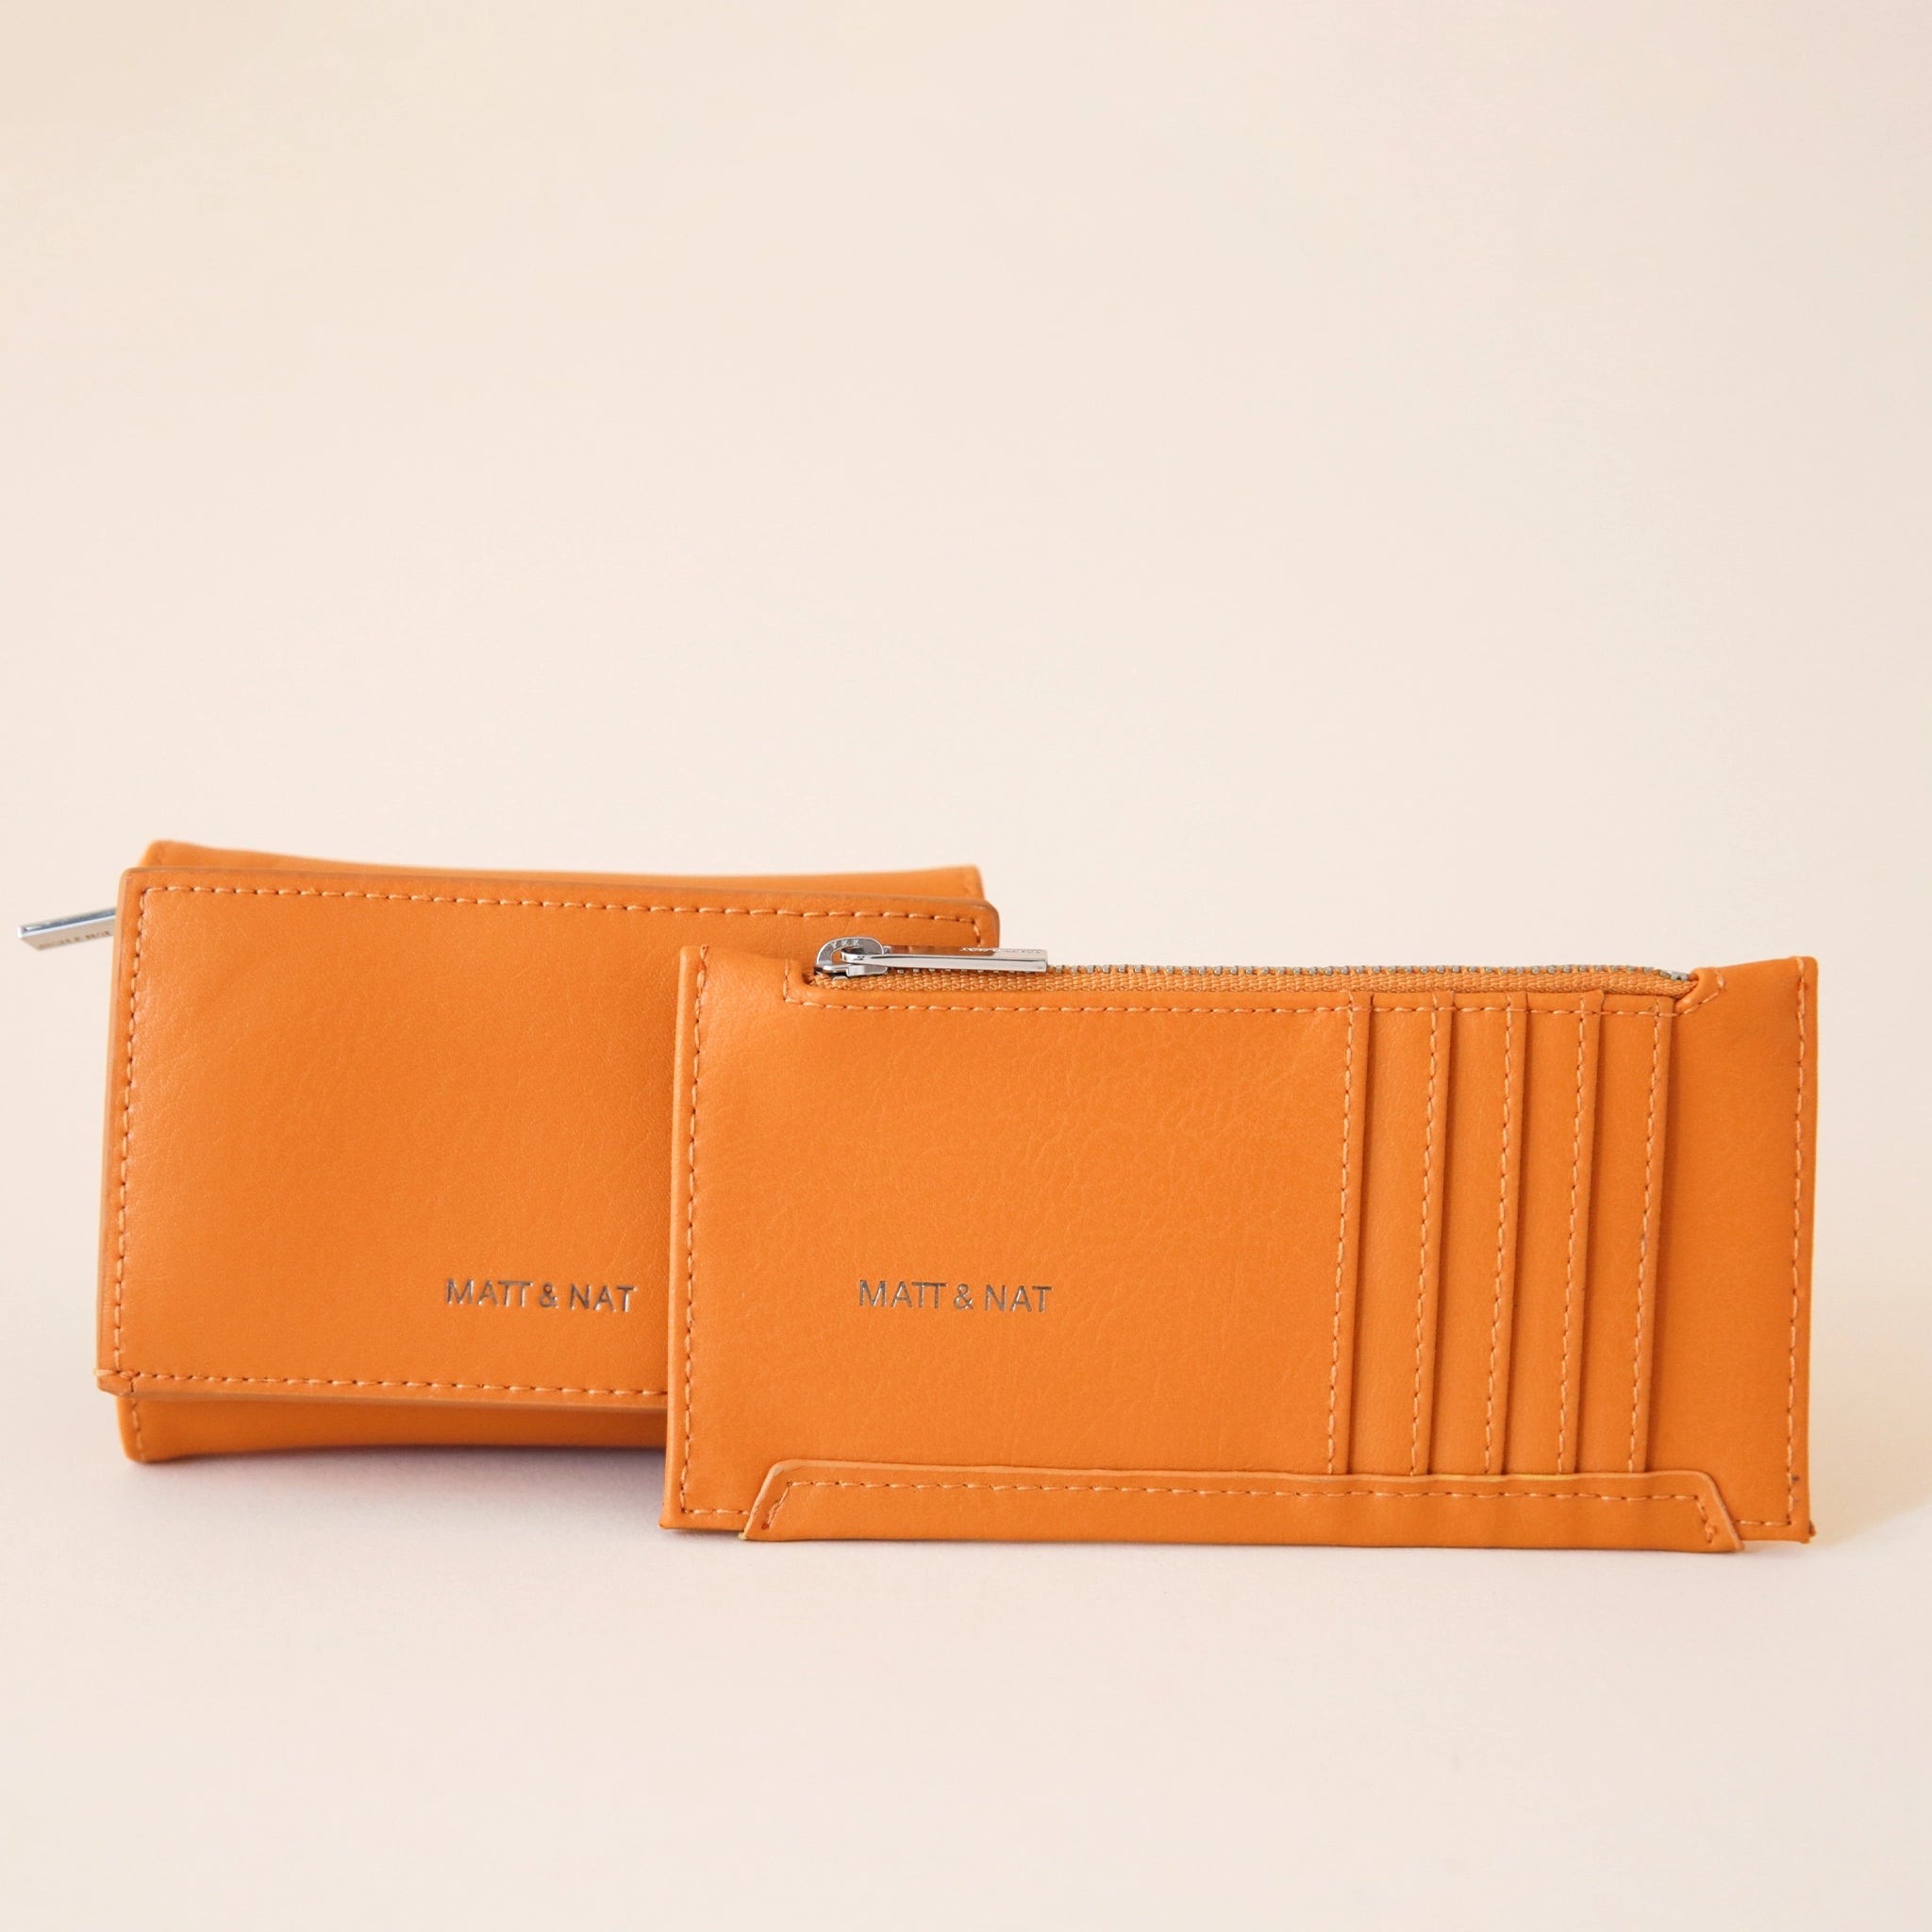 On a cream background is a bright orange colored squares wallet with a folding detail and tiny text on the bottom of the front that reads, "Matt & Nat" photographed next to a card holder that we also sell on our website. 